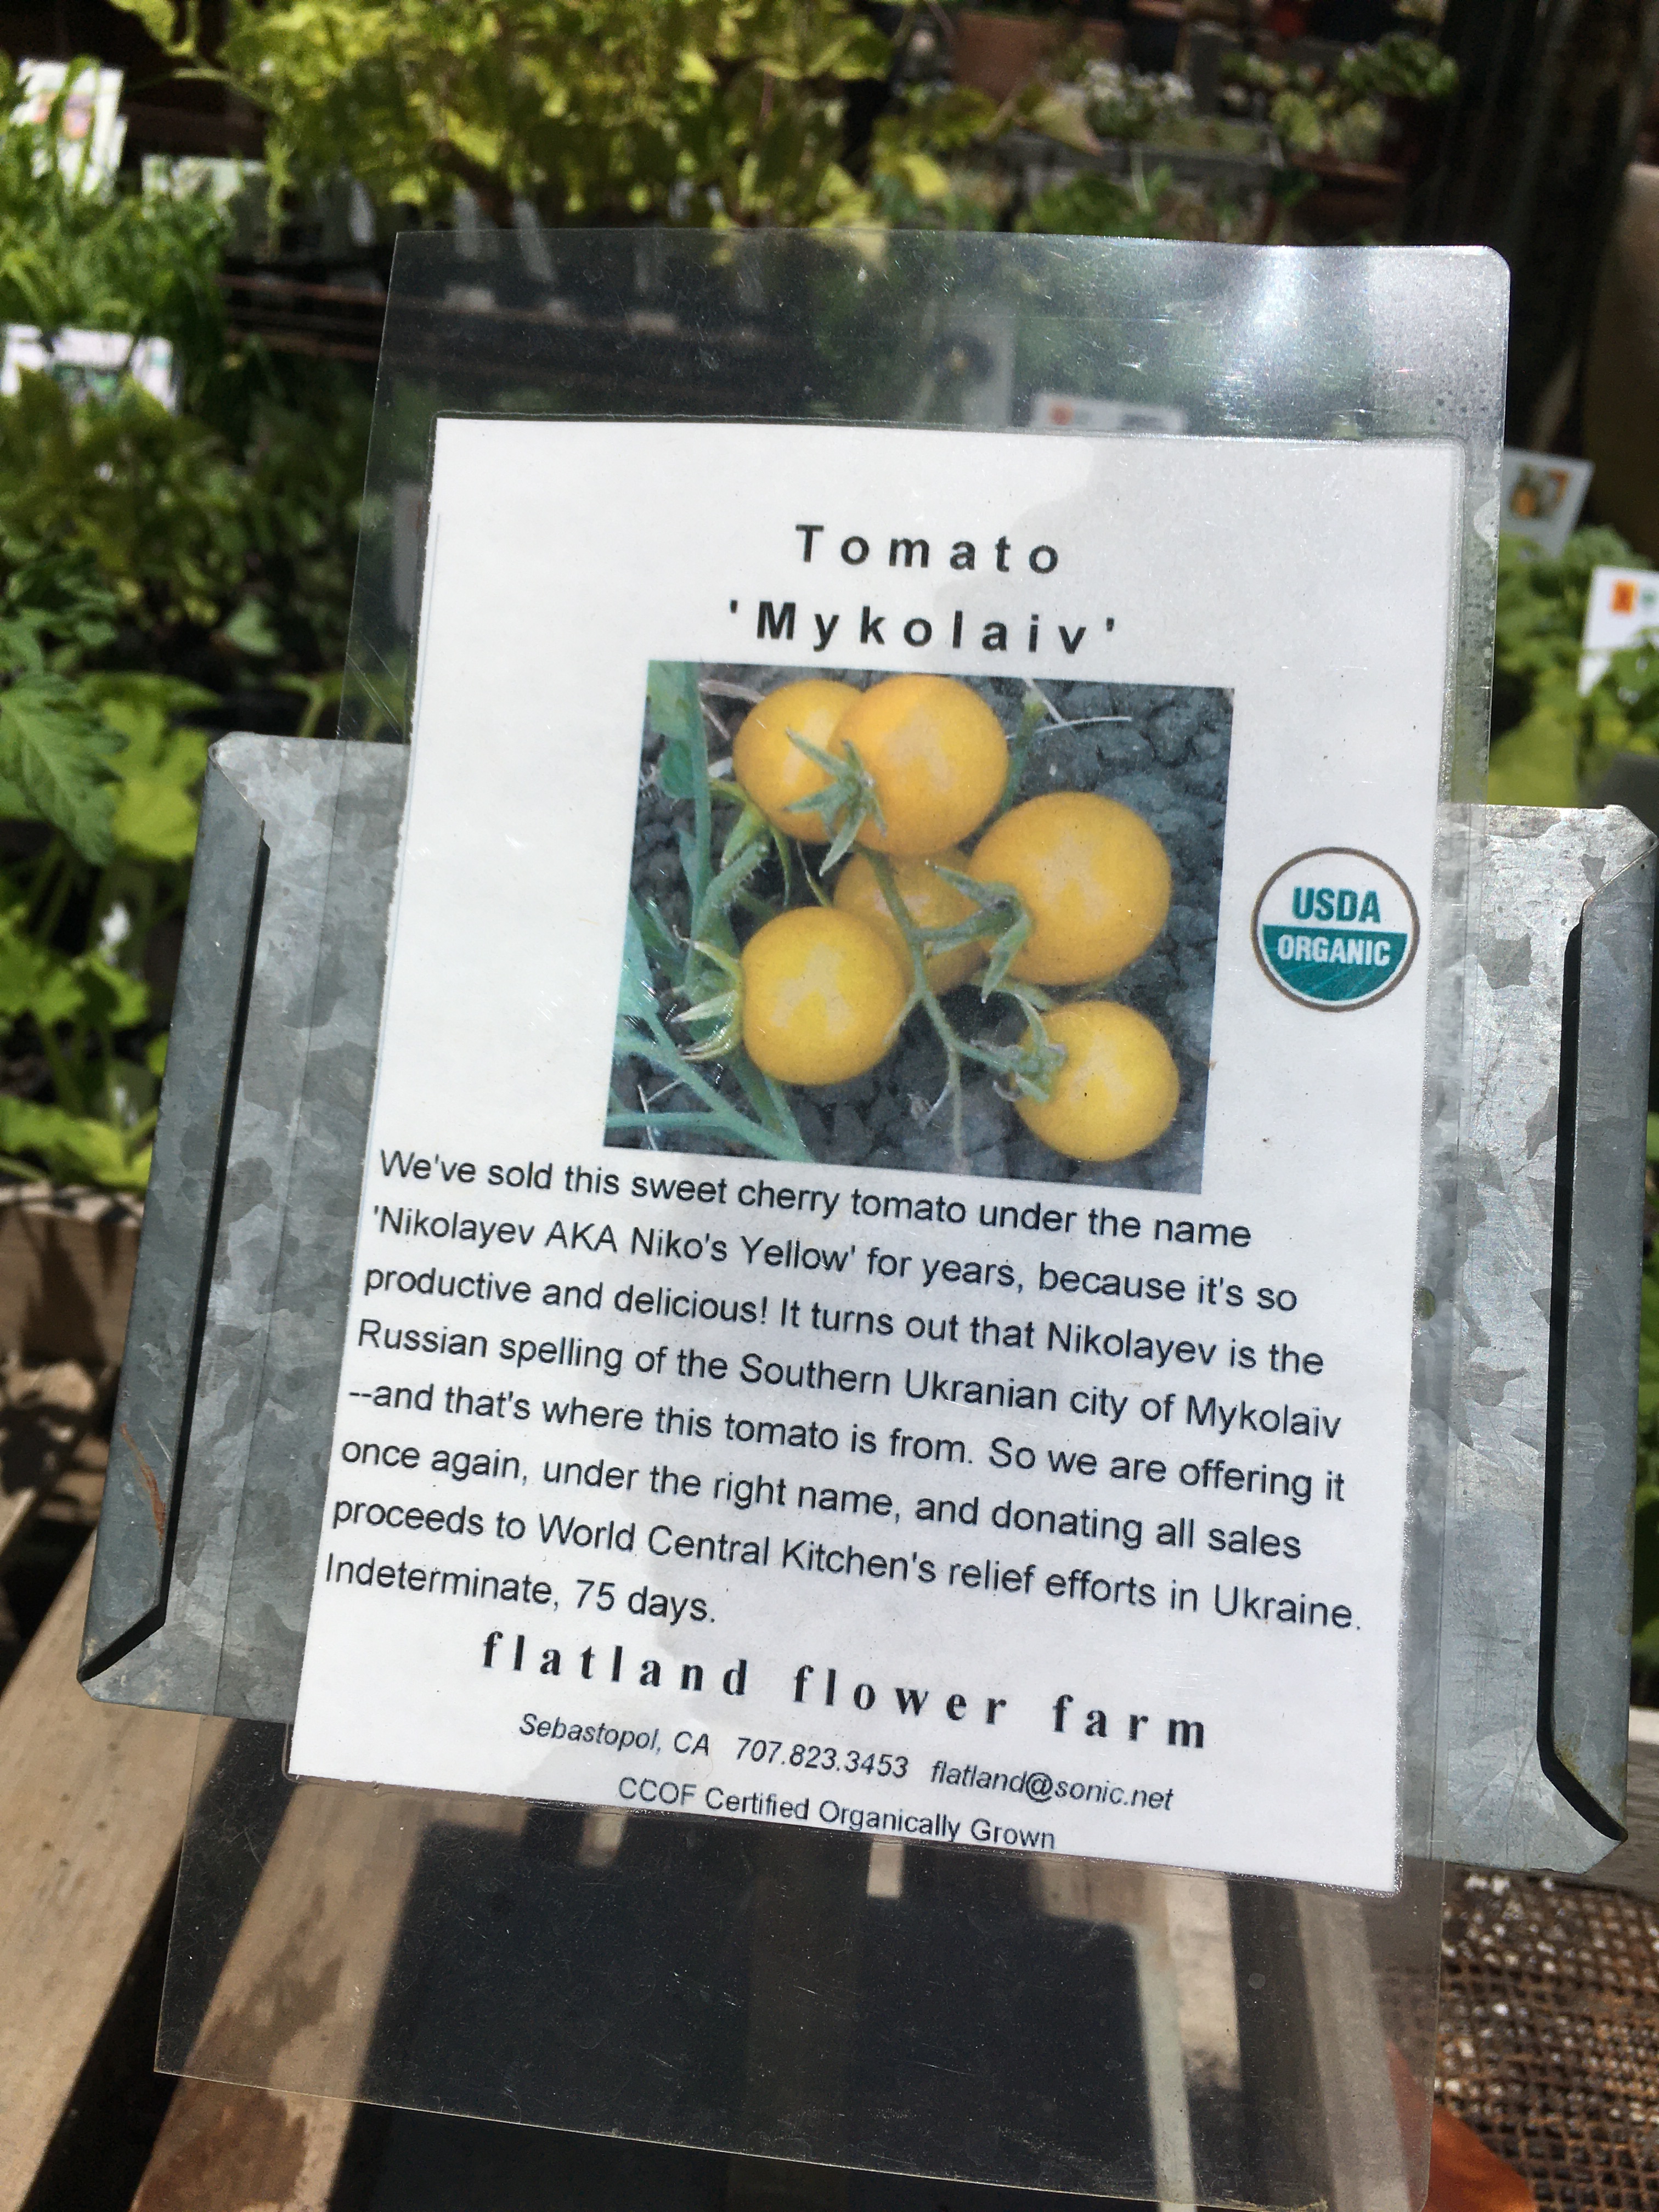 Photo of a sign about yellow cherry tomato "Mykolaiv" which originates from a Ukrainian city of that name.